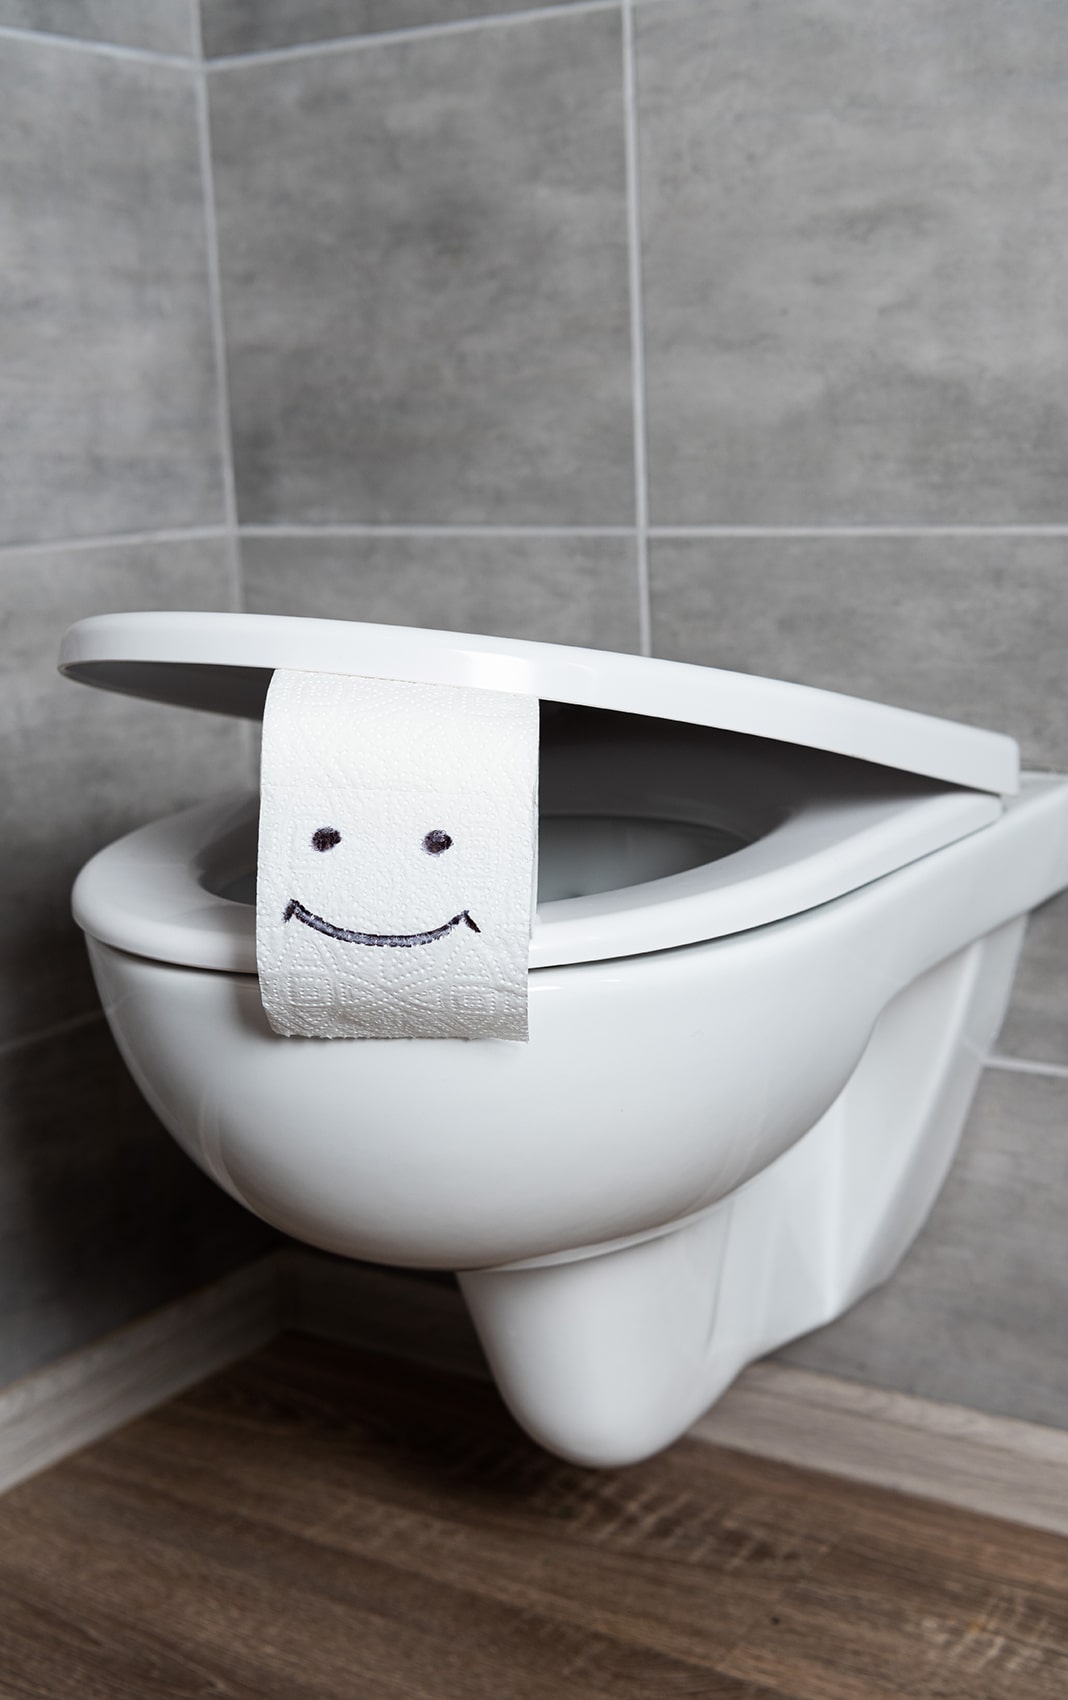 a toilet with toilet paper in the lid. the toilet paper has a happy face drawn on it.